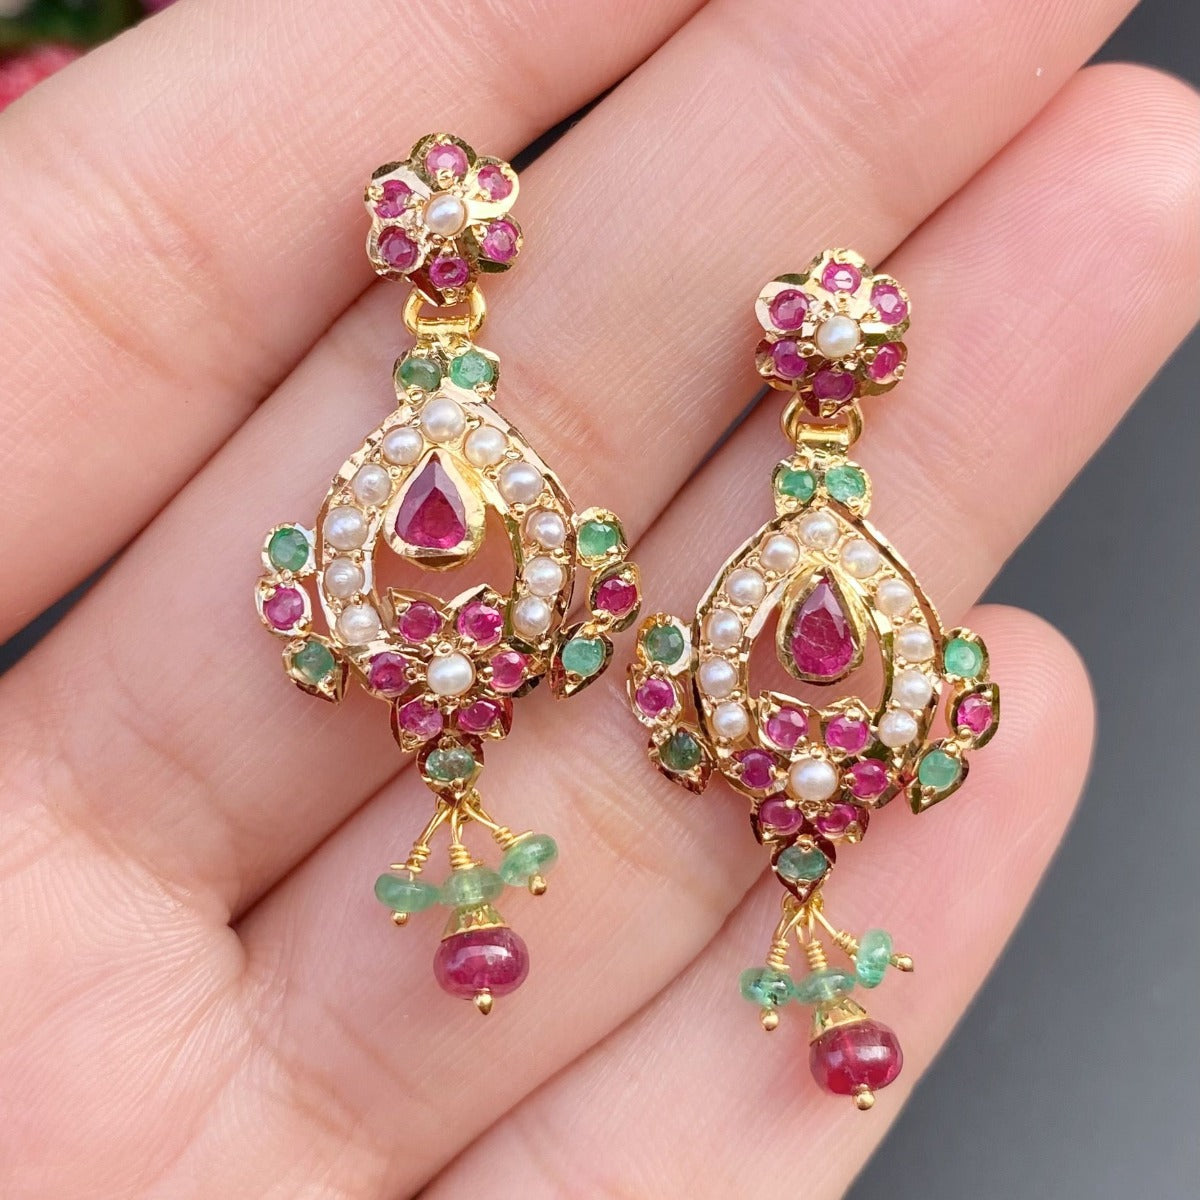 Shop Gold Pendant and Earring Sets | Rarefind Indian Jewelry GPS 076